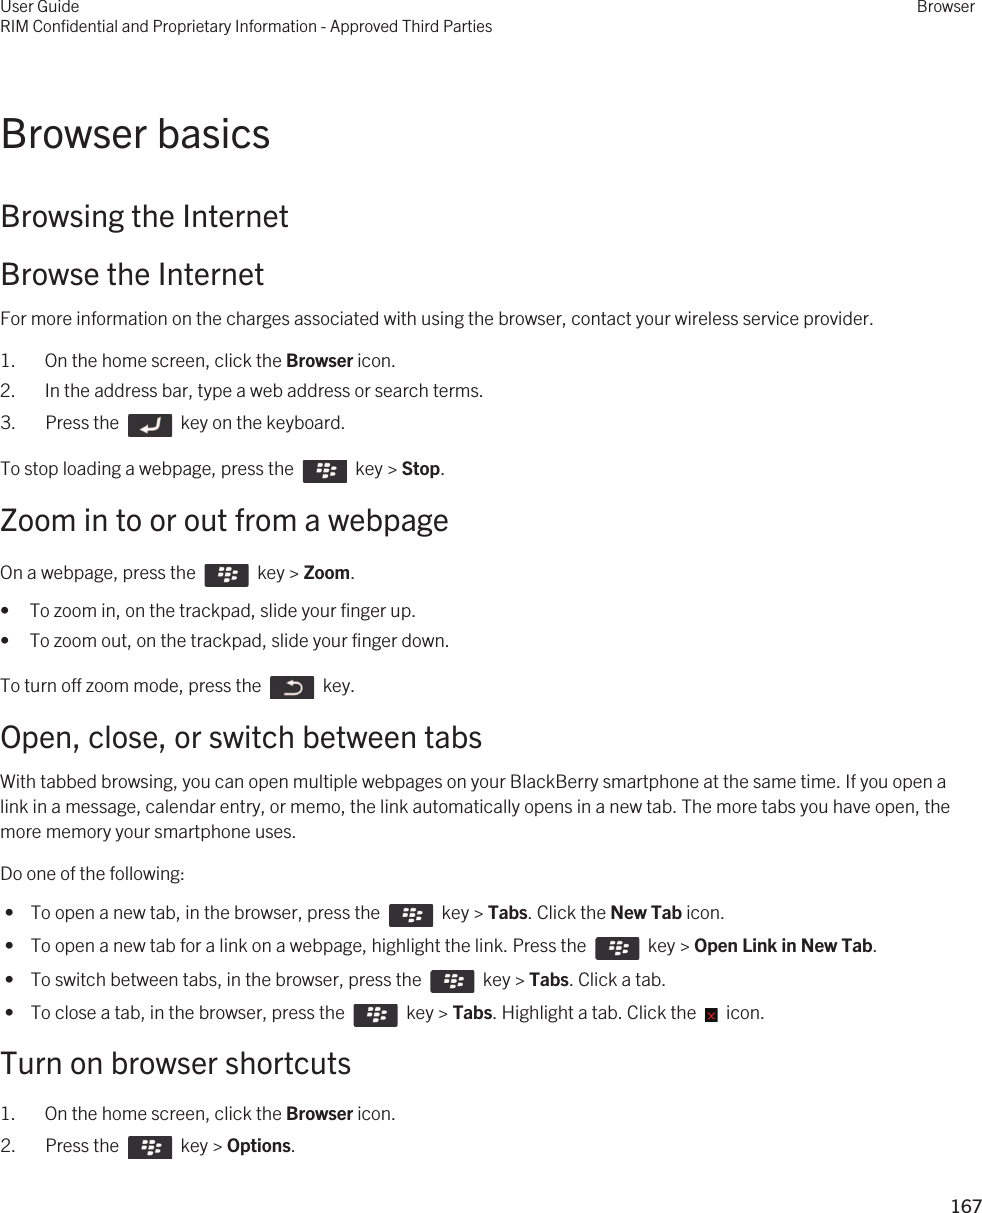 Browser basicsBrowsing the InternetBrowse the InternetFor more information on the charges associated with using the browser, contact your wireless service provider.1. On the home screen, click the Browser icon.2. In the address bar, type a web address or search terms.3.  Press the    key on the keyboard. To stop loading a webpage, press the    key &gt; Stop.Zoom in to or out from a webpageOn a webpage, press the    key &gt; Zoom. • To zoom in, on the trackpad, slide your finger up.• To zoom out, on the trackpad, slide your finger down.To turn off zoom mode, press the    key.Open, close, or switch between tabsWith tabbed browsing, you can open multiple webpages on your BlackBerry smartphone at the same time. If you open a link in a message, calendar entry, or memo, the link automatically opens in a new tab. The more tabs you have open, the more memory your smartphone uses.Do one of the following: •  To open a new tab, in the browser, press the    key &gt; Tabs. Click the New Tab icon. •  To open a new tab for a link on a webpage, highlight the link. Press the    key &gt; Open Link in New Tab. •  To switch between tabs, in the browser, press the    key &gt; Tabs. Click a tab. •  To close a tab, in the browser, press the    key &gt; Tabs. Highlight a tab. Click the    icon.Turn on browser shortcuts1. On the home screen, click the Browser icon.2.  Press the    key &gt; Options. User GuideRIM Confidential and Proprietary Information - Approved Third PartiesBrowser167 